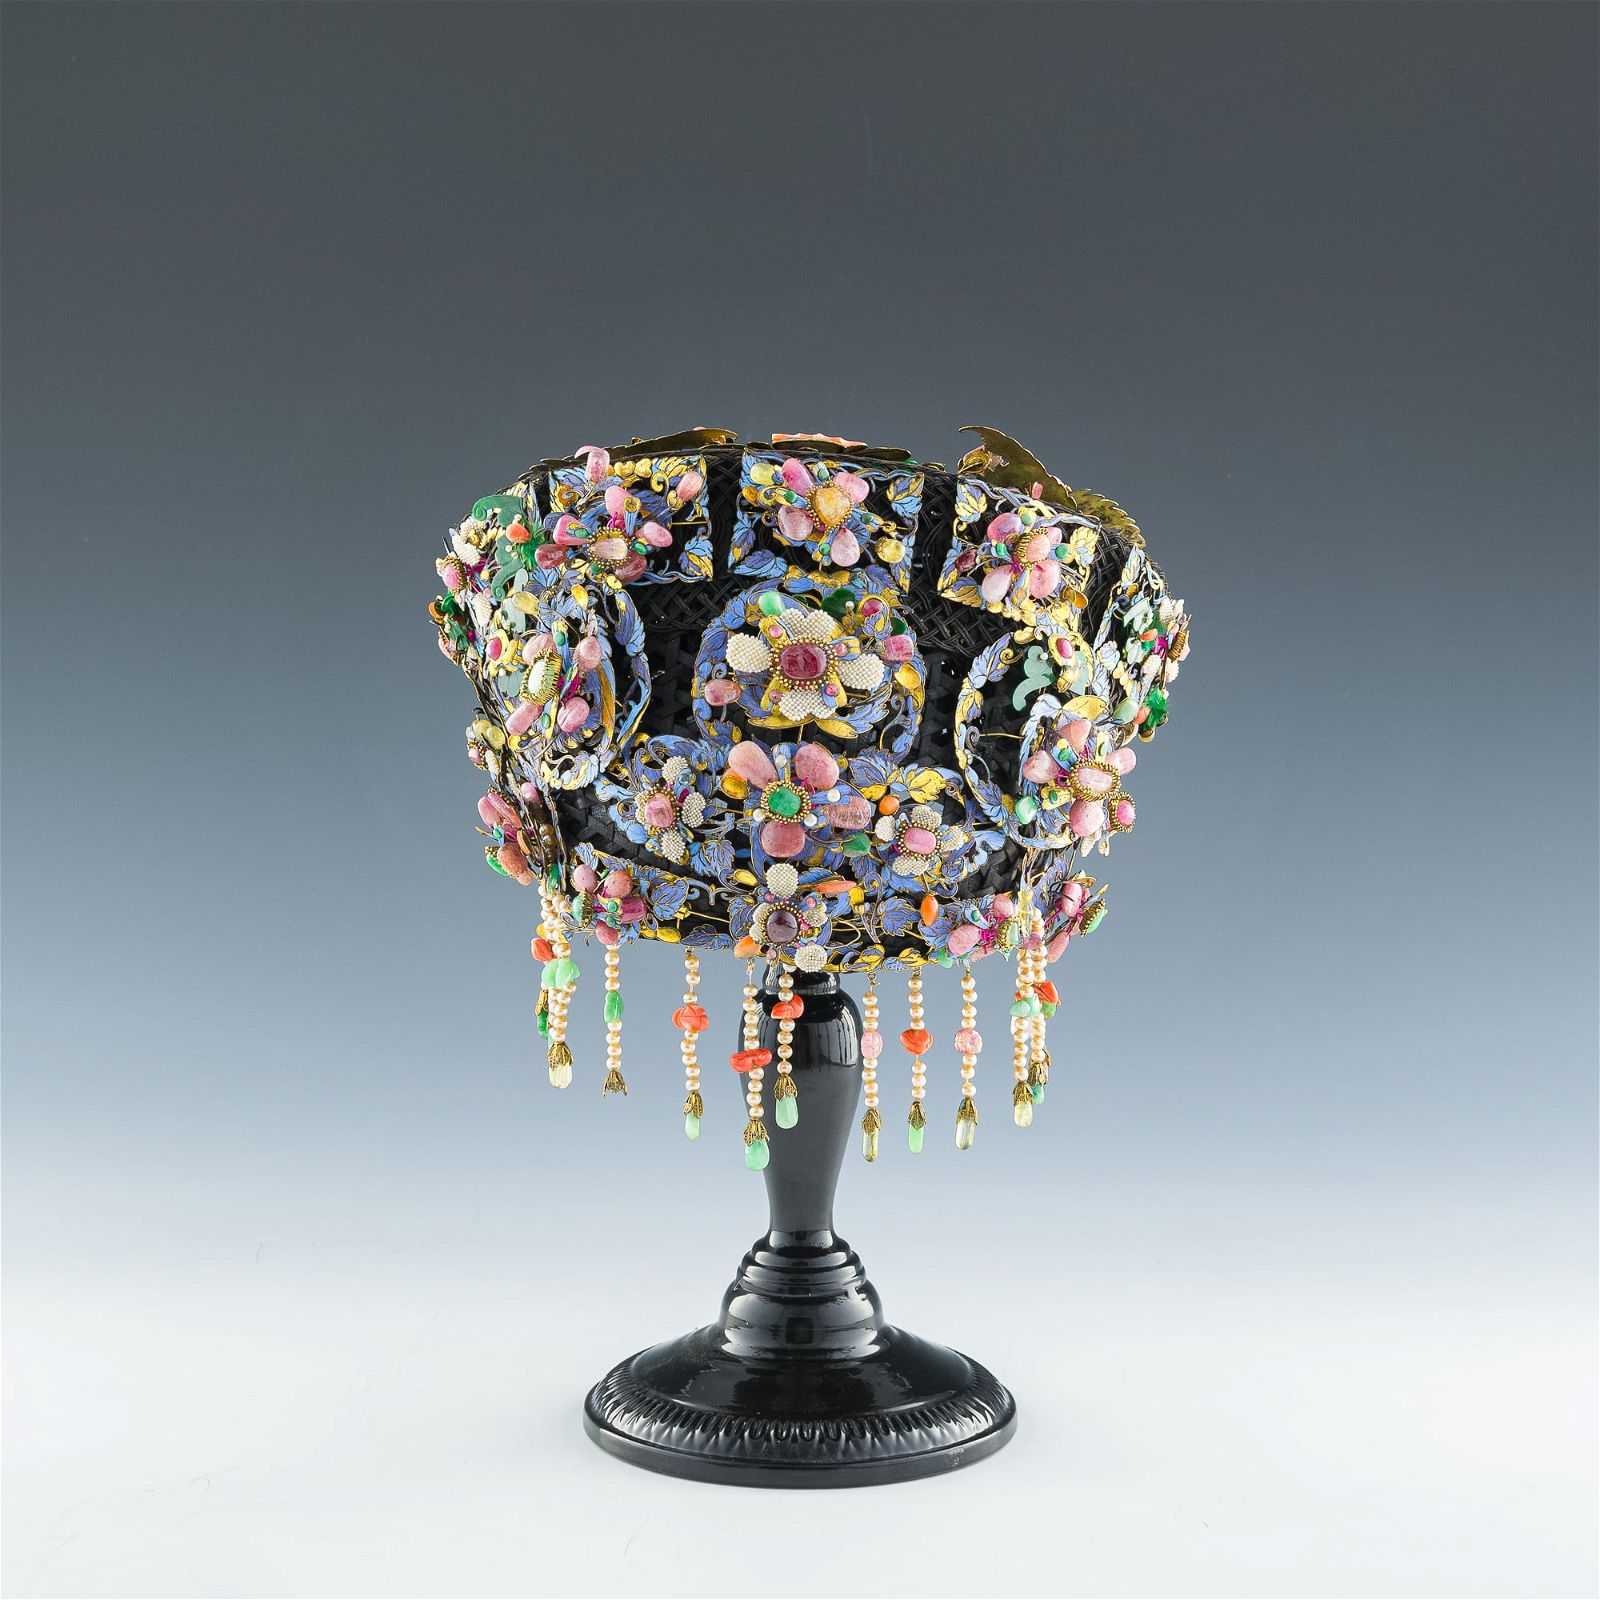 Qing dynasty kingfisher feather and gem-set headdress, estimated at $1,000-$1,500 at Oakridge Auction Gallery on May 19.